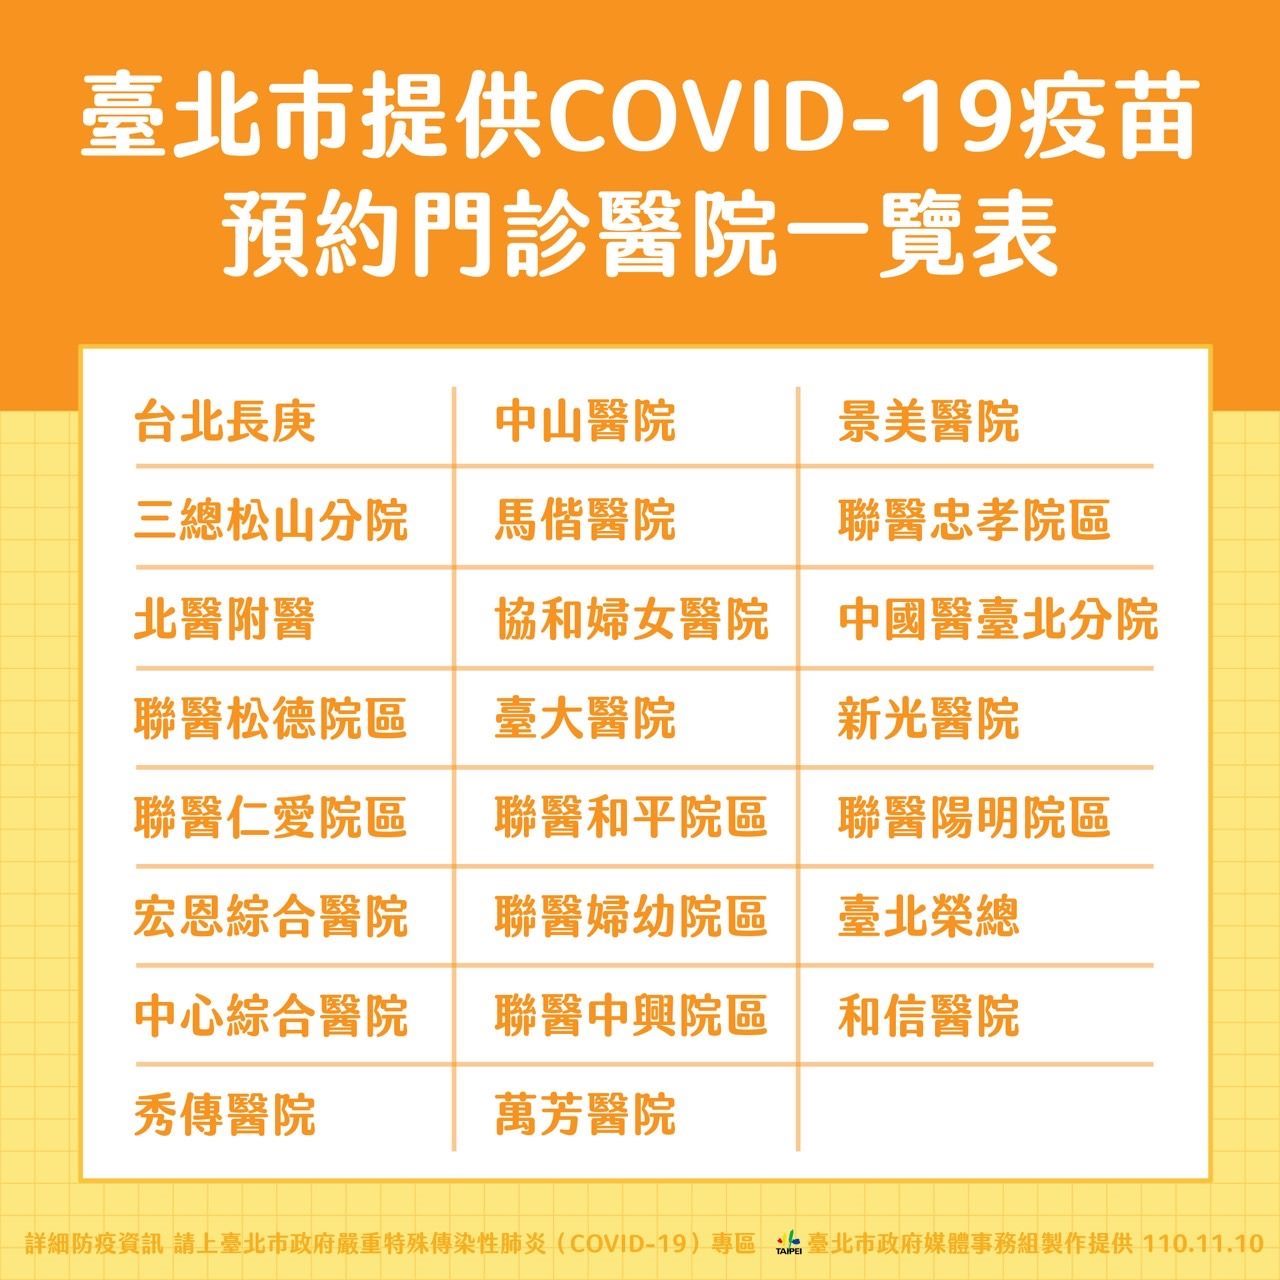 ​New Option for COVID Vaccination: 23 Hospitals to Offer Outpatient Service